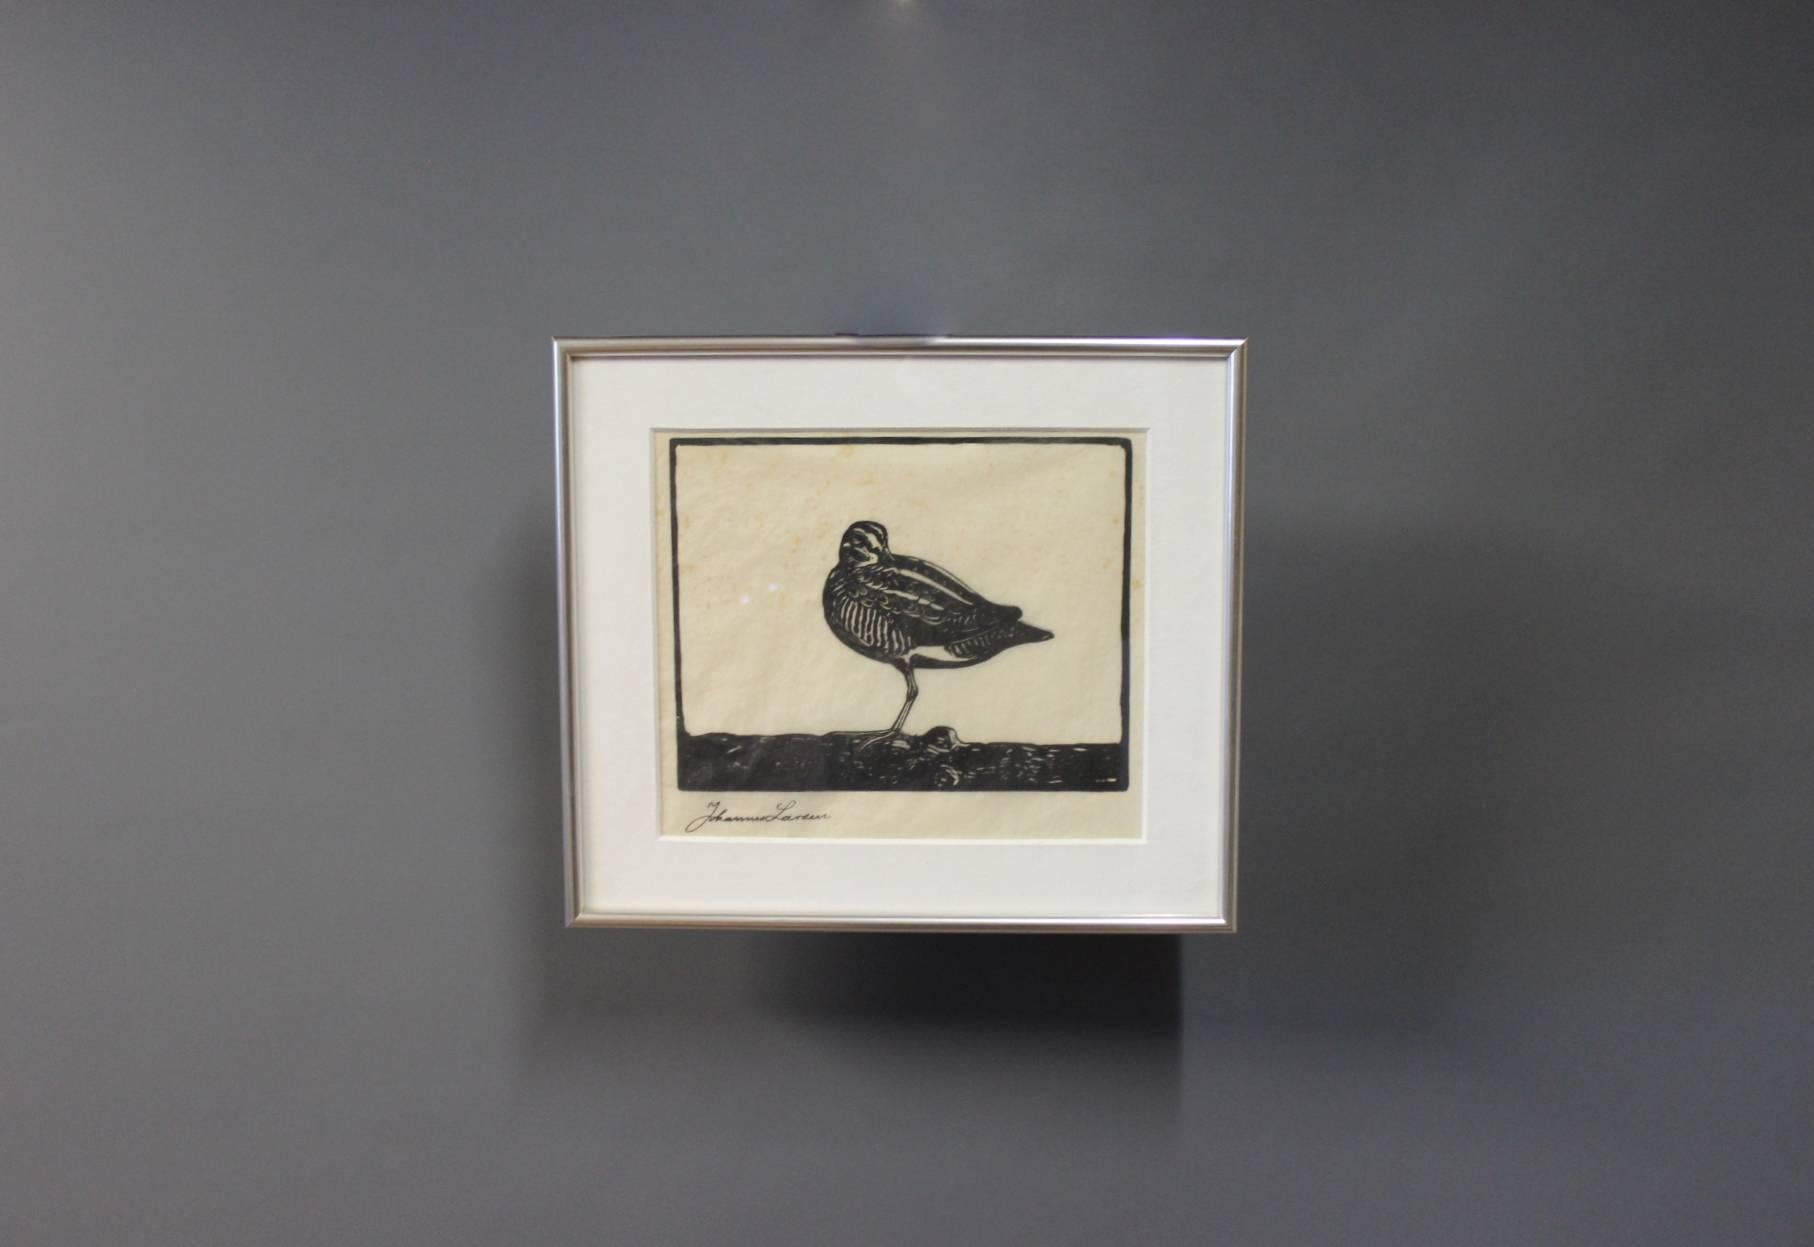 Woodcut on Japanese paper of a snipe signed in the print by the Danish artist Johannes Larsen, 1867-1961.